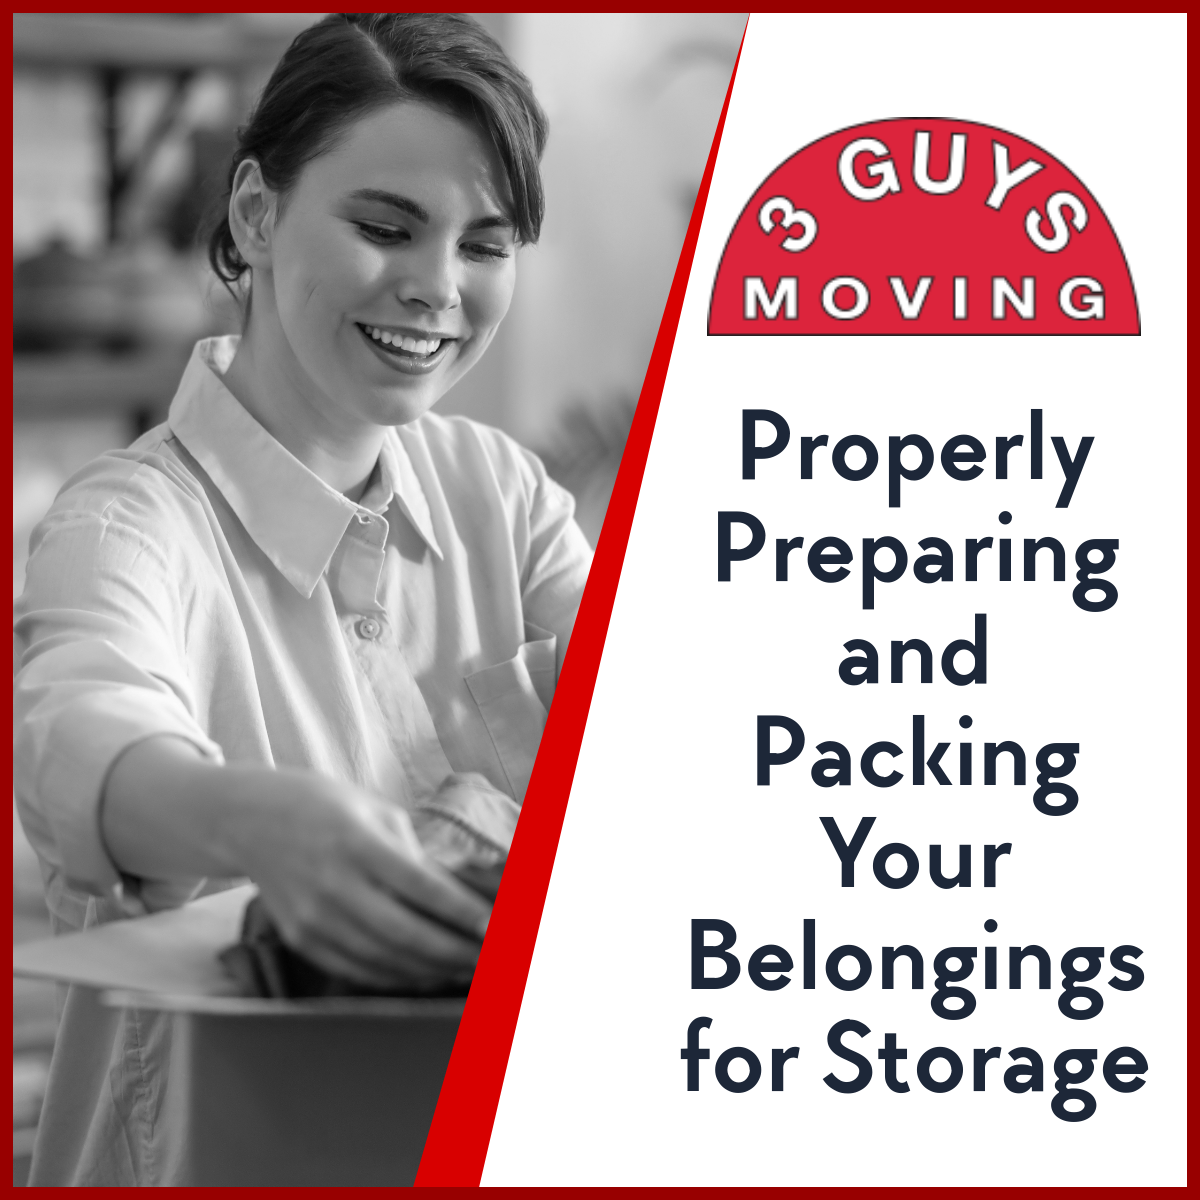 Properly Preparing and Packing Your Belongings for Storage - Properly Preparing and Packing Your Belongings for Storage